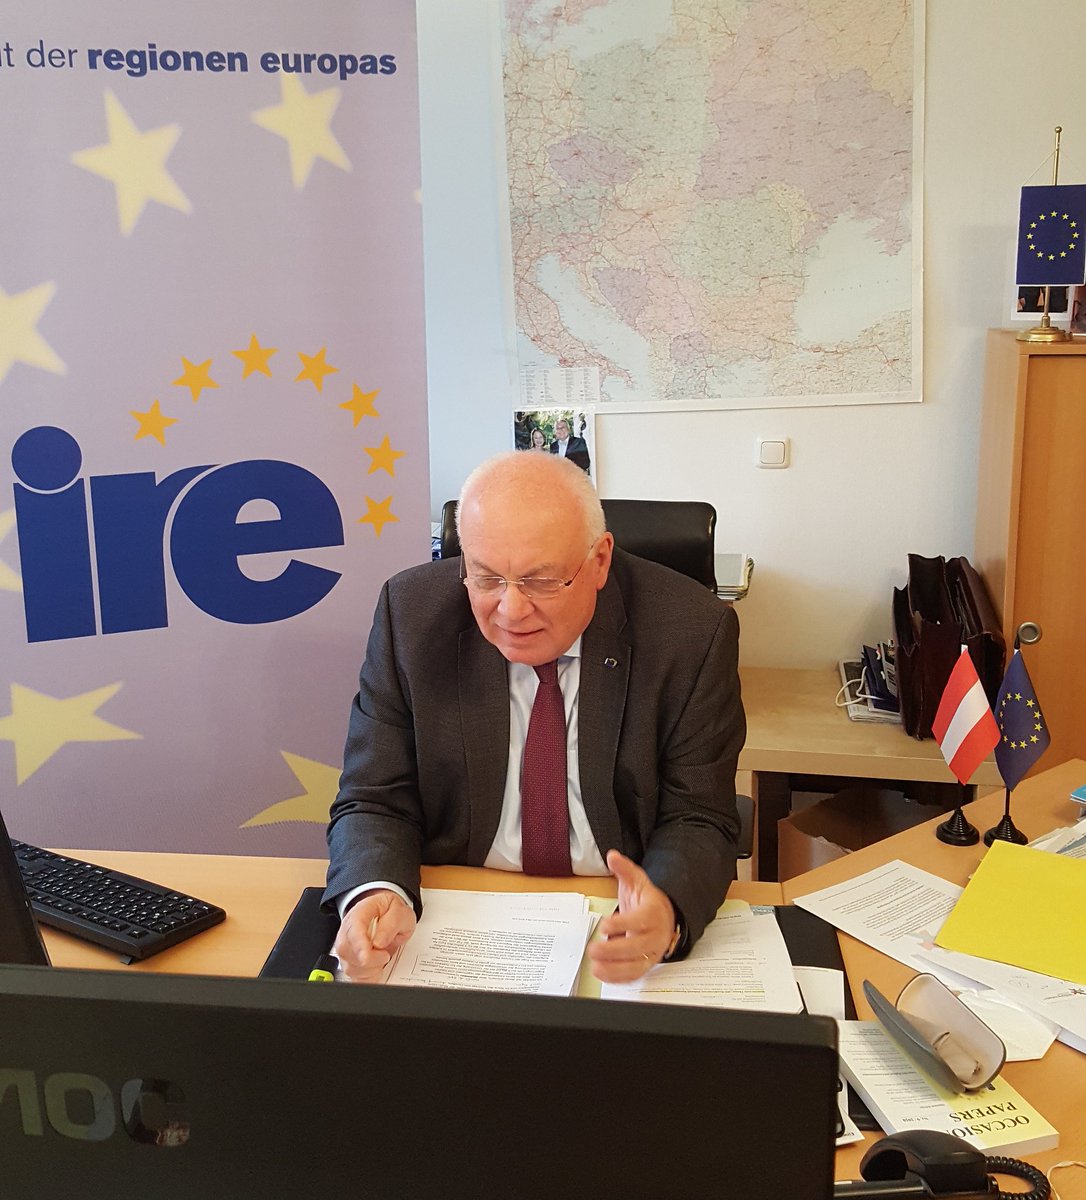 Again videomeetings 💻 Today: #CIVEX-Commission of the European Committee of the Regions 🇪🇺

Franz Schausberger will talk about the #EnlargementPackage 2020 and the Conference of the Future of #Europe on conmection with the #WesternBalkans!

@EPP_CoR @EU_CoR